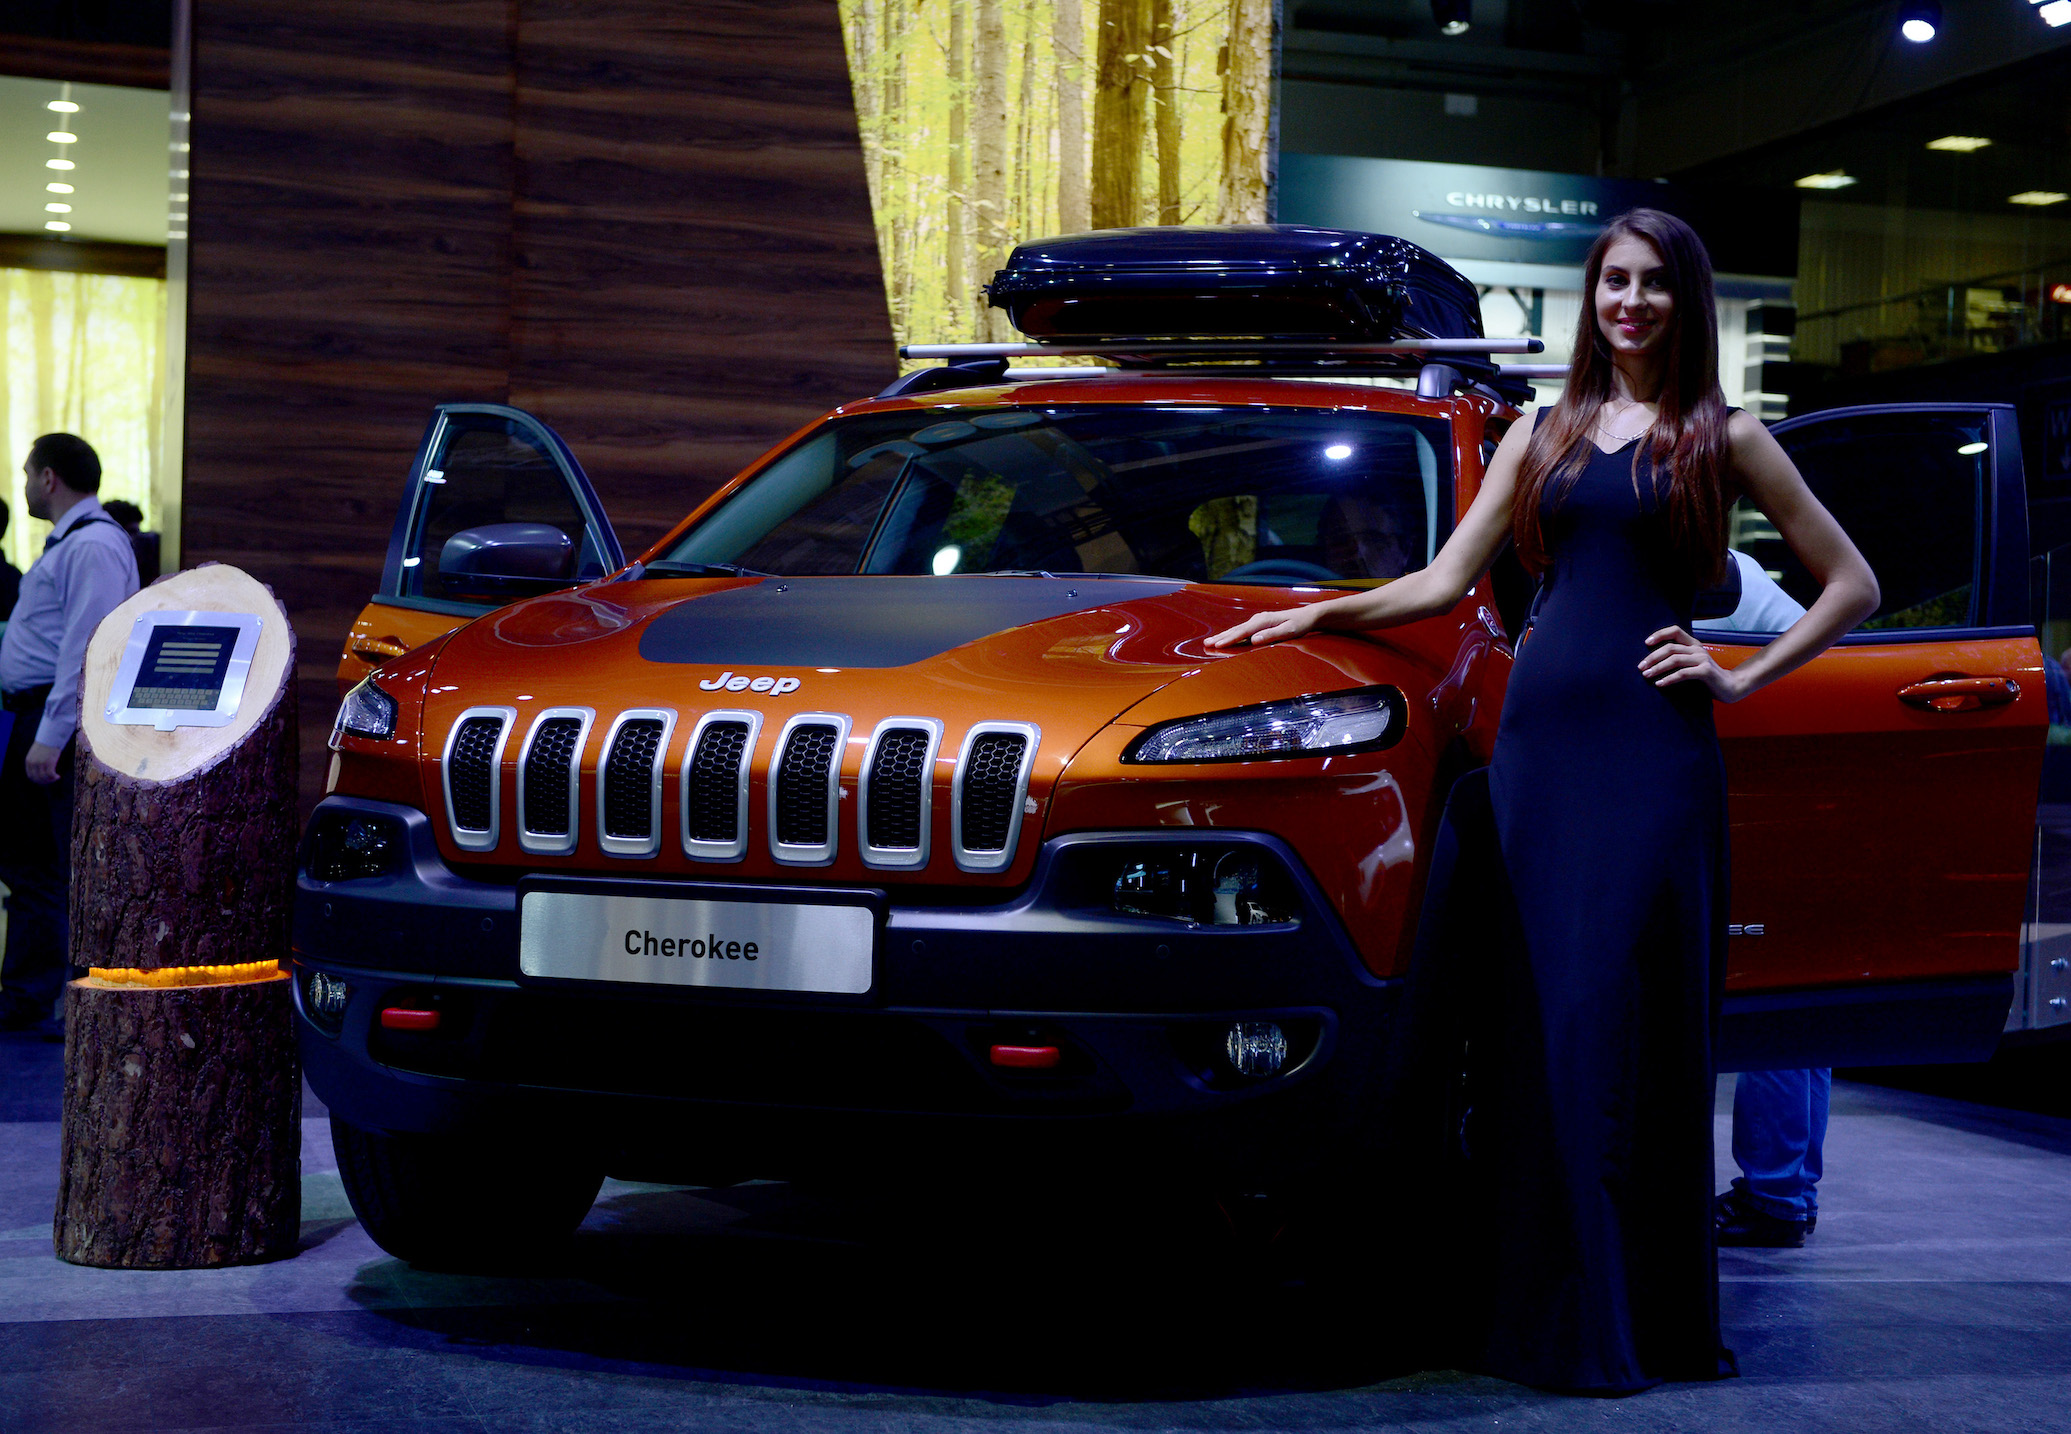 A model poses next to Cherokee model of Jeep during the Moscow International Motor Show 'Autosalon 2014